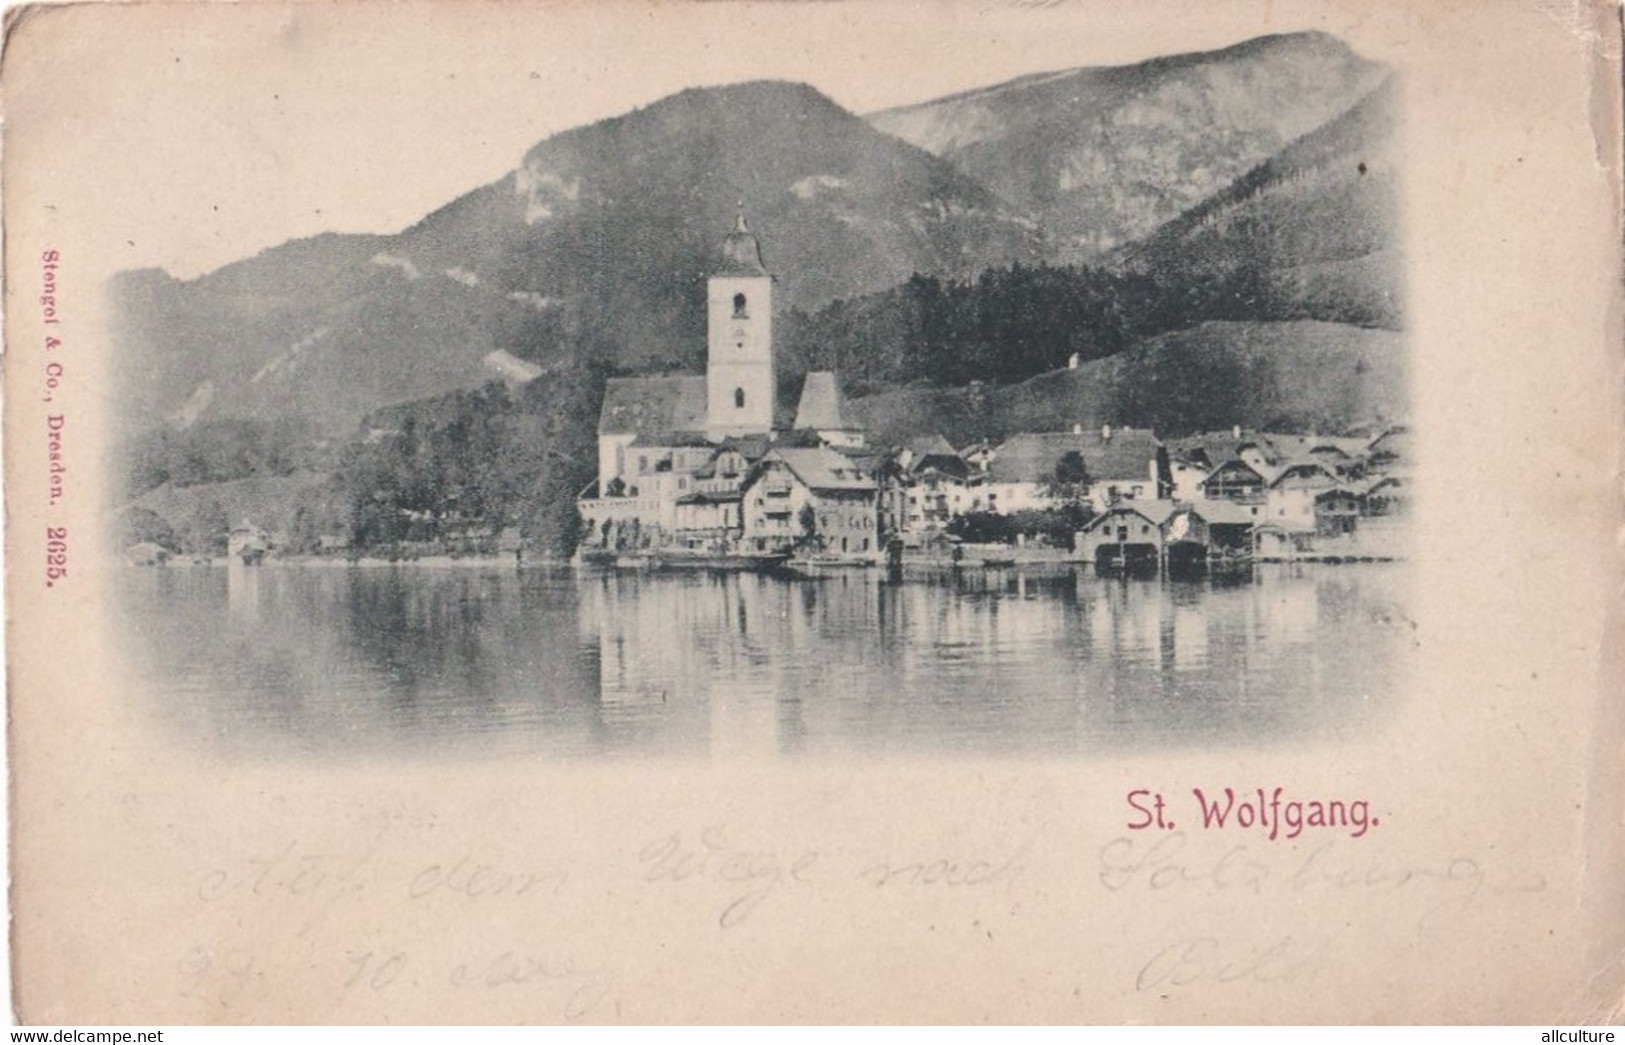 A3873 - Austria - St. Wolfgang VINTAGE POSTCARD USED 1899 MADE BY STANGEL & CO  DRESDEN 2625 - Gmünd